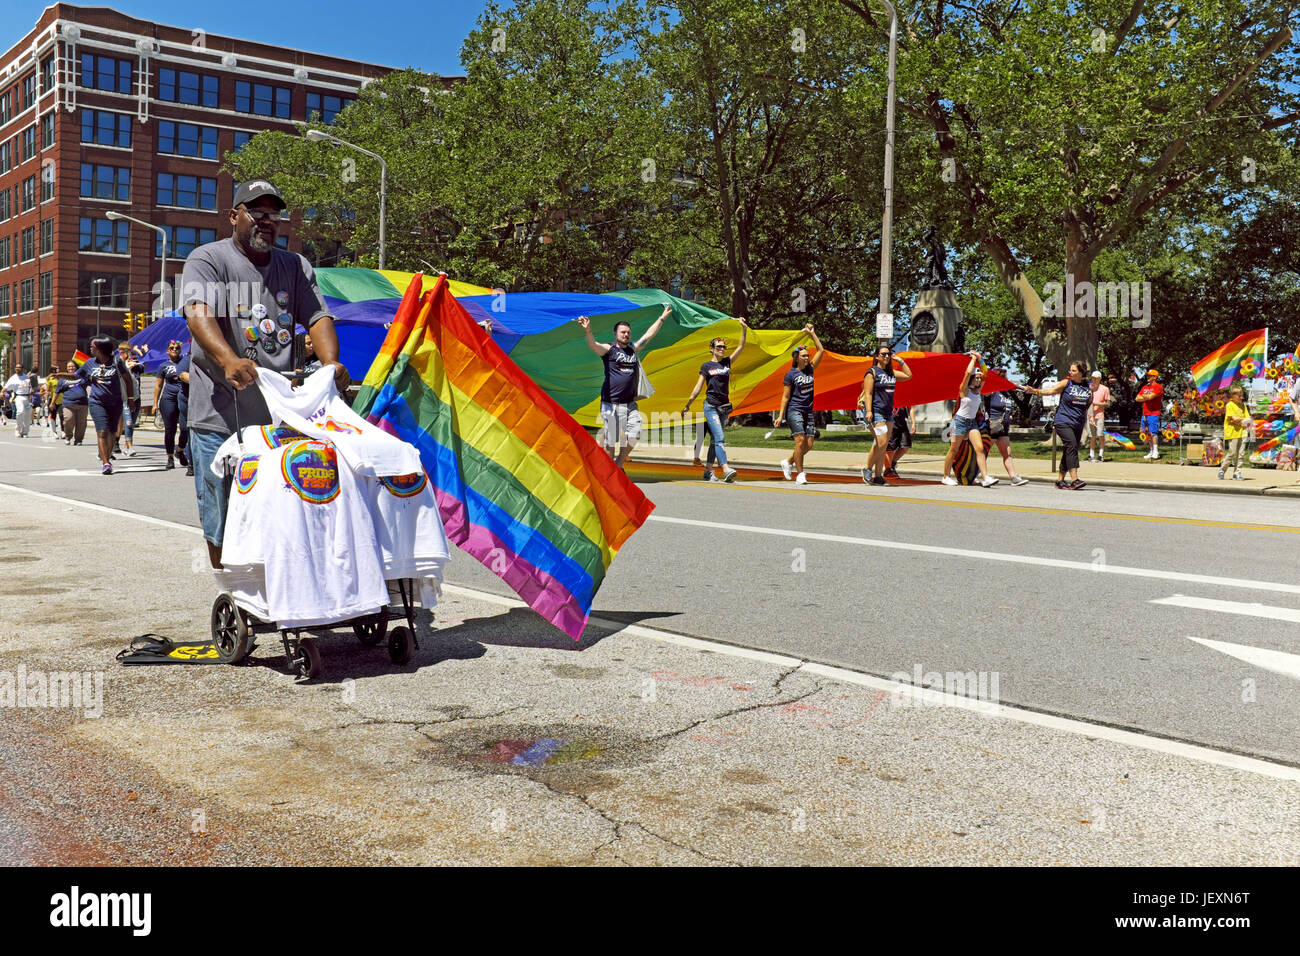 Vendor selling LGBT pride 2017 T-shirts and flags along the parade route in downtown Cleveland, Ohio, while a large rainbow flag is carried by. Stock Photo